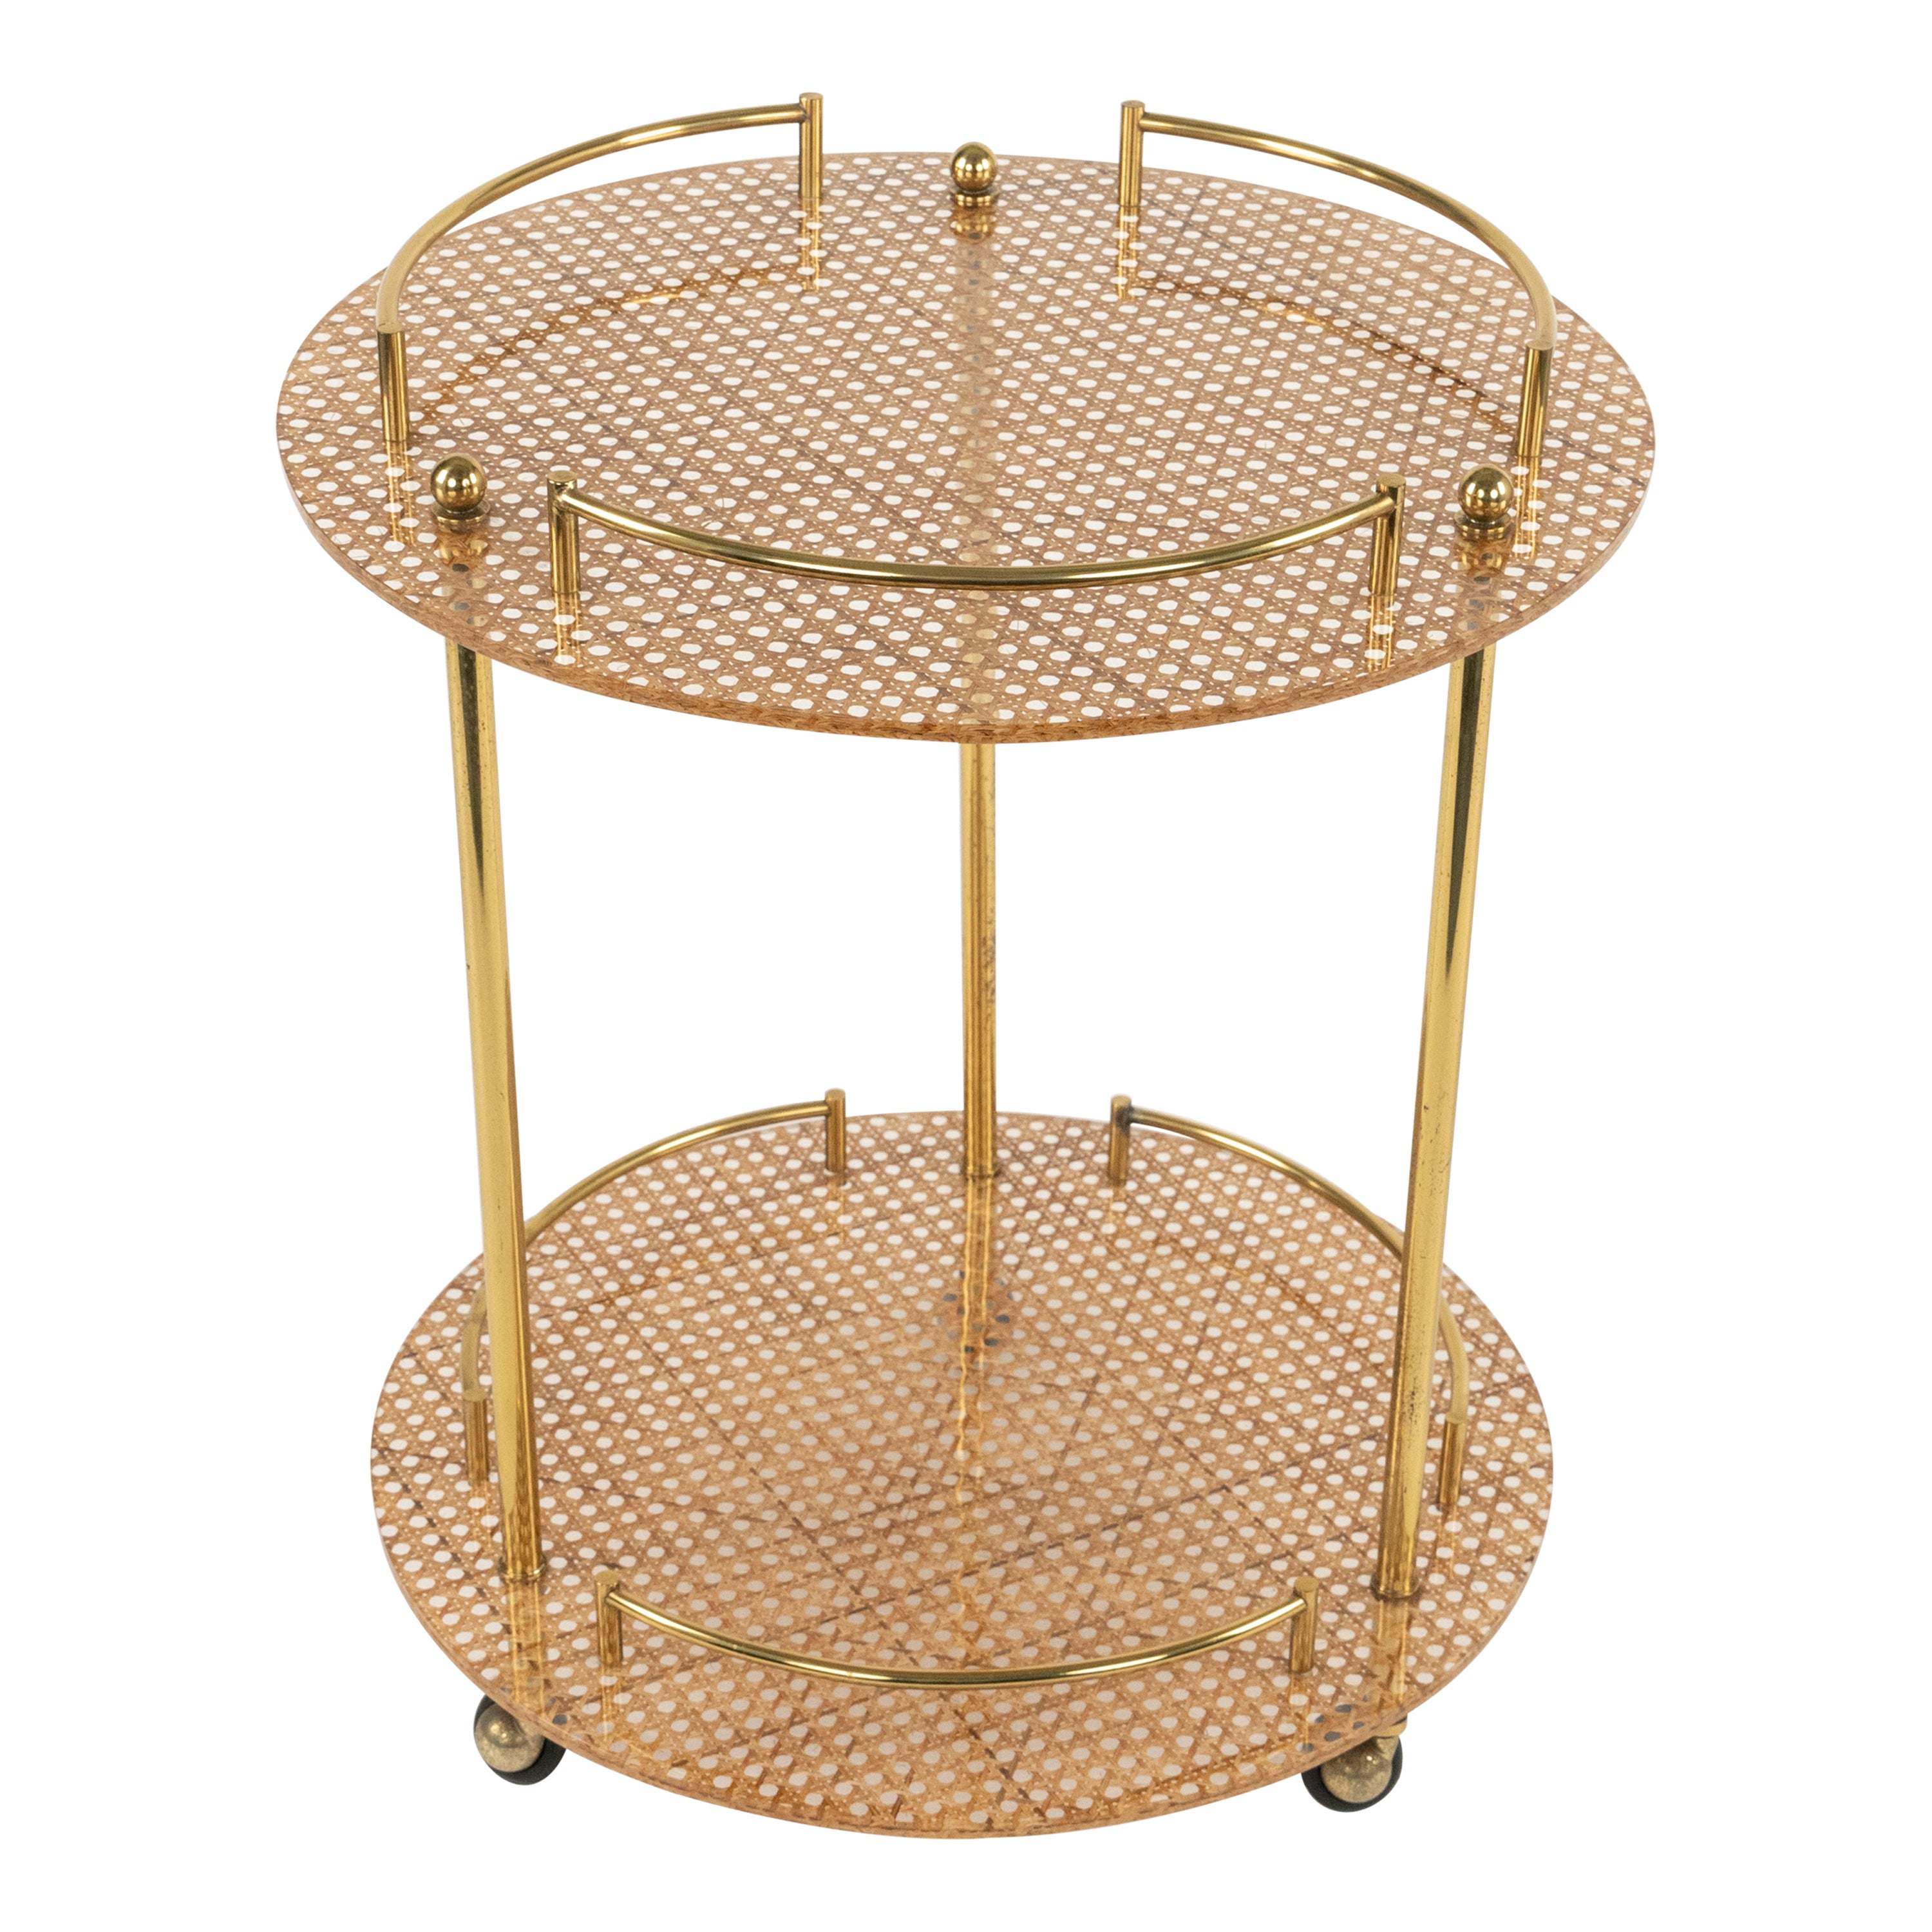 Serving Bar Cart in Lucite, Brass and Rattan Christian Dior Style, Italy 1970s For Sale